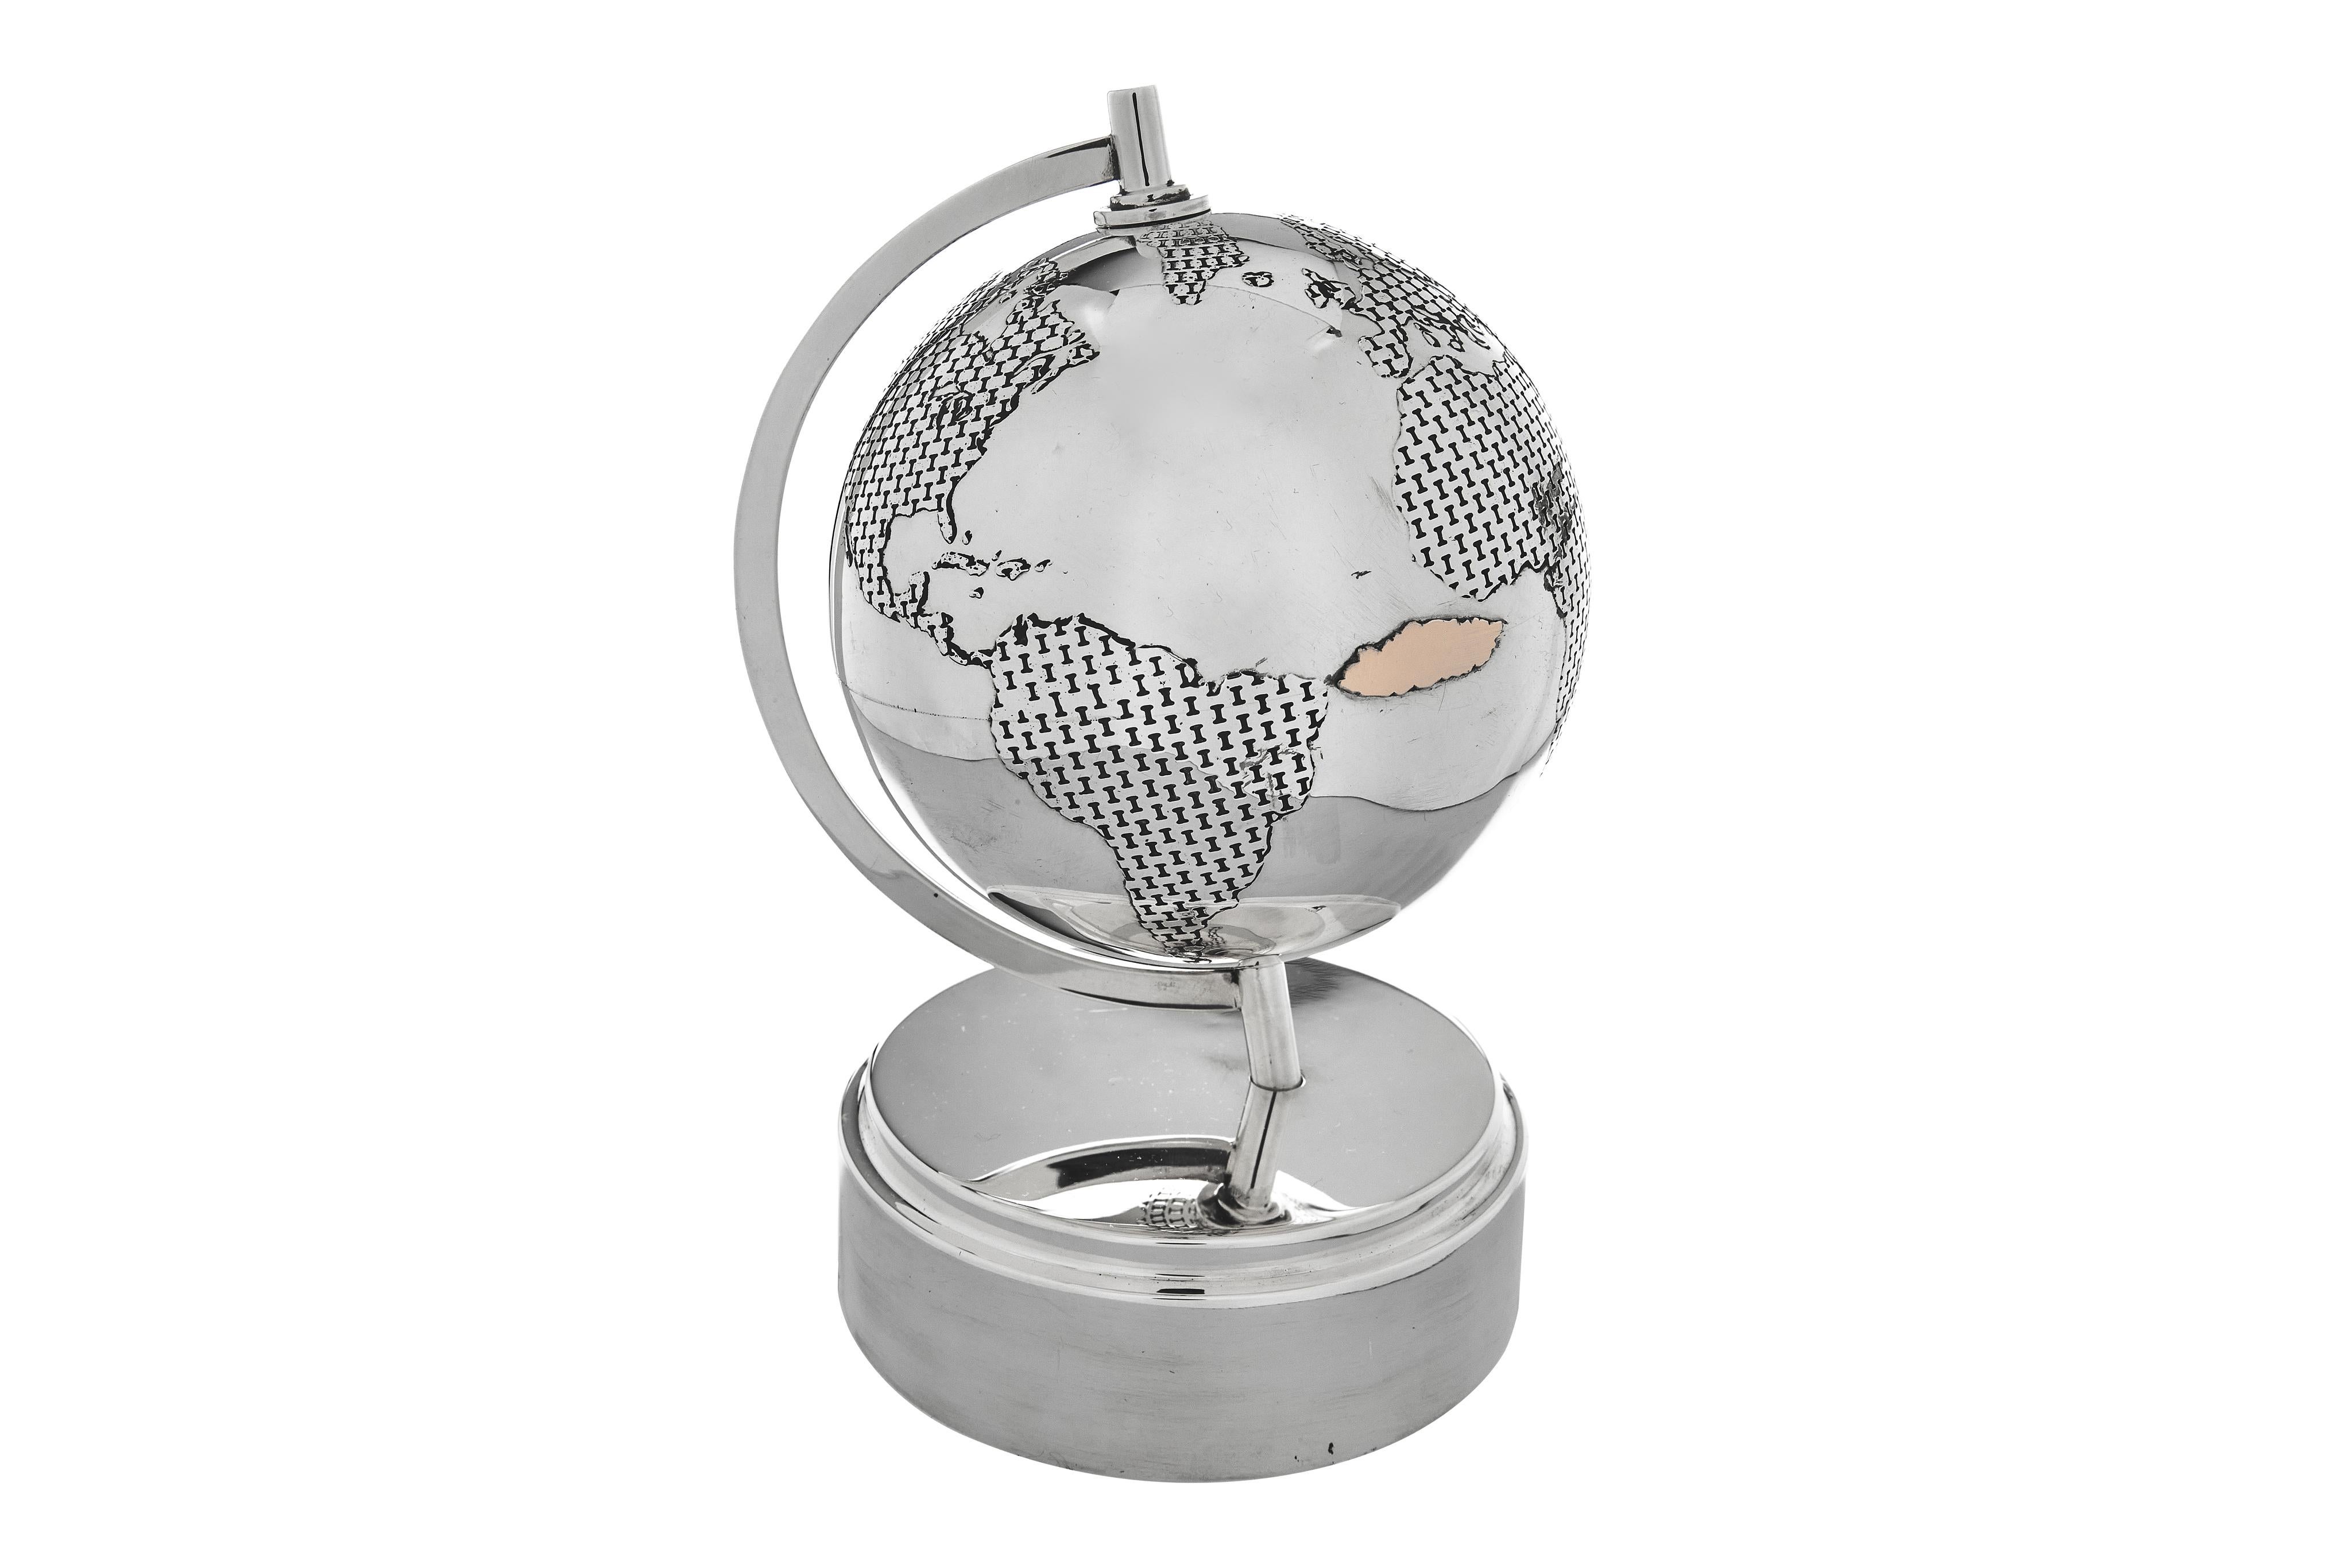 A rare and stunning Tiffany sterling globe. It has gold 